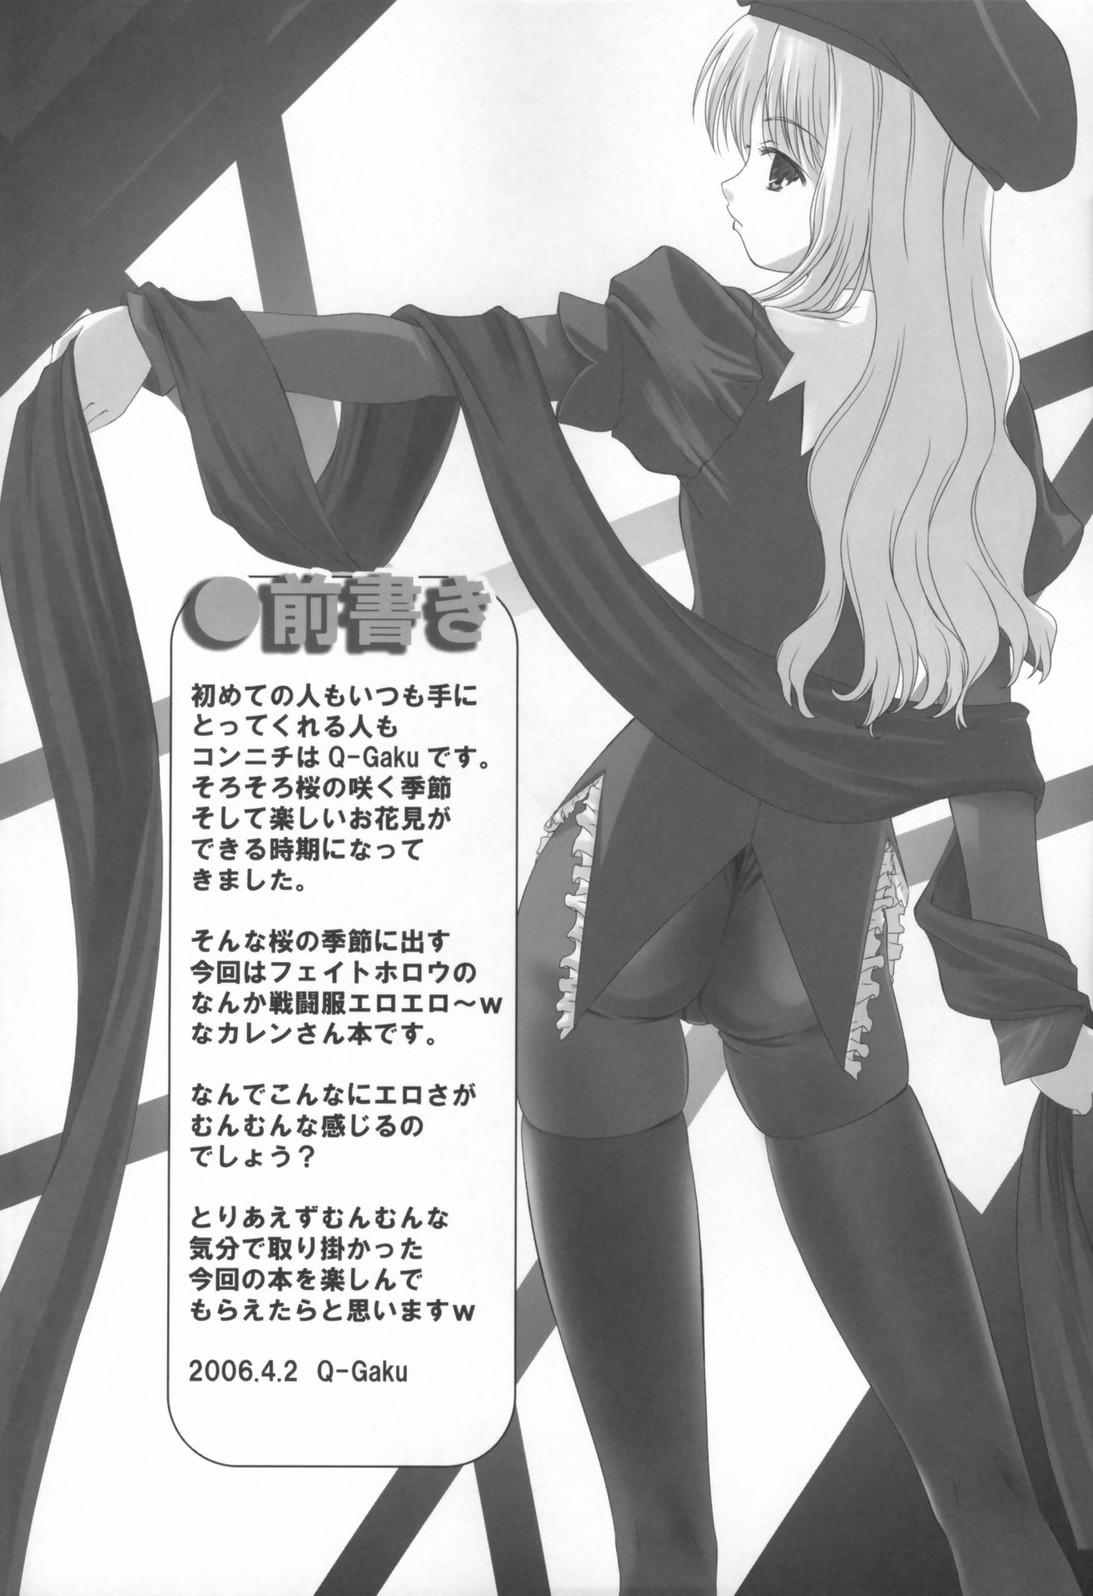 Tgirl Madness of sister - Fate hollow ataraxia Class Room - Page 3